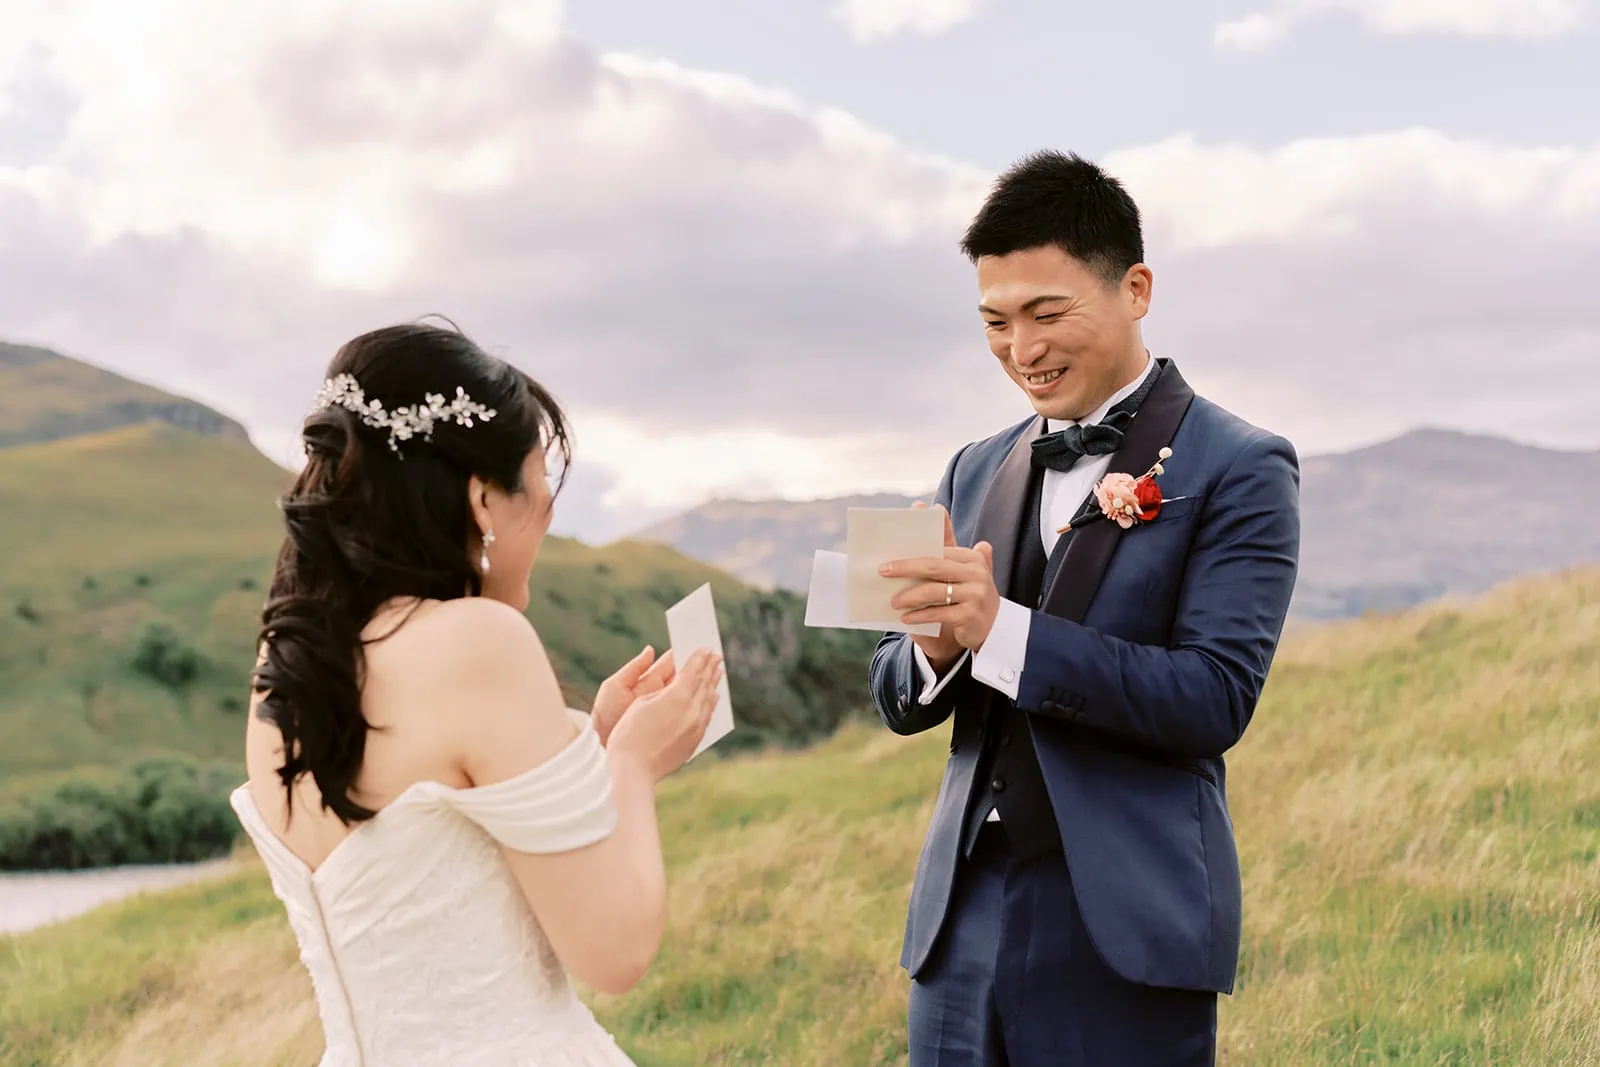 Queenstown Elopement Heli Wedding Photographer クイーンズタウン結婚式 | A bride and groom having a pre-wedding photoshoot in a field with mountains in the background.